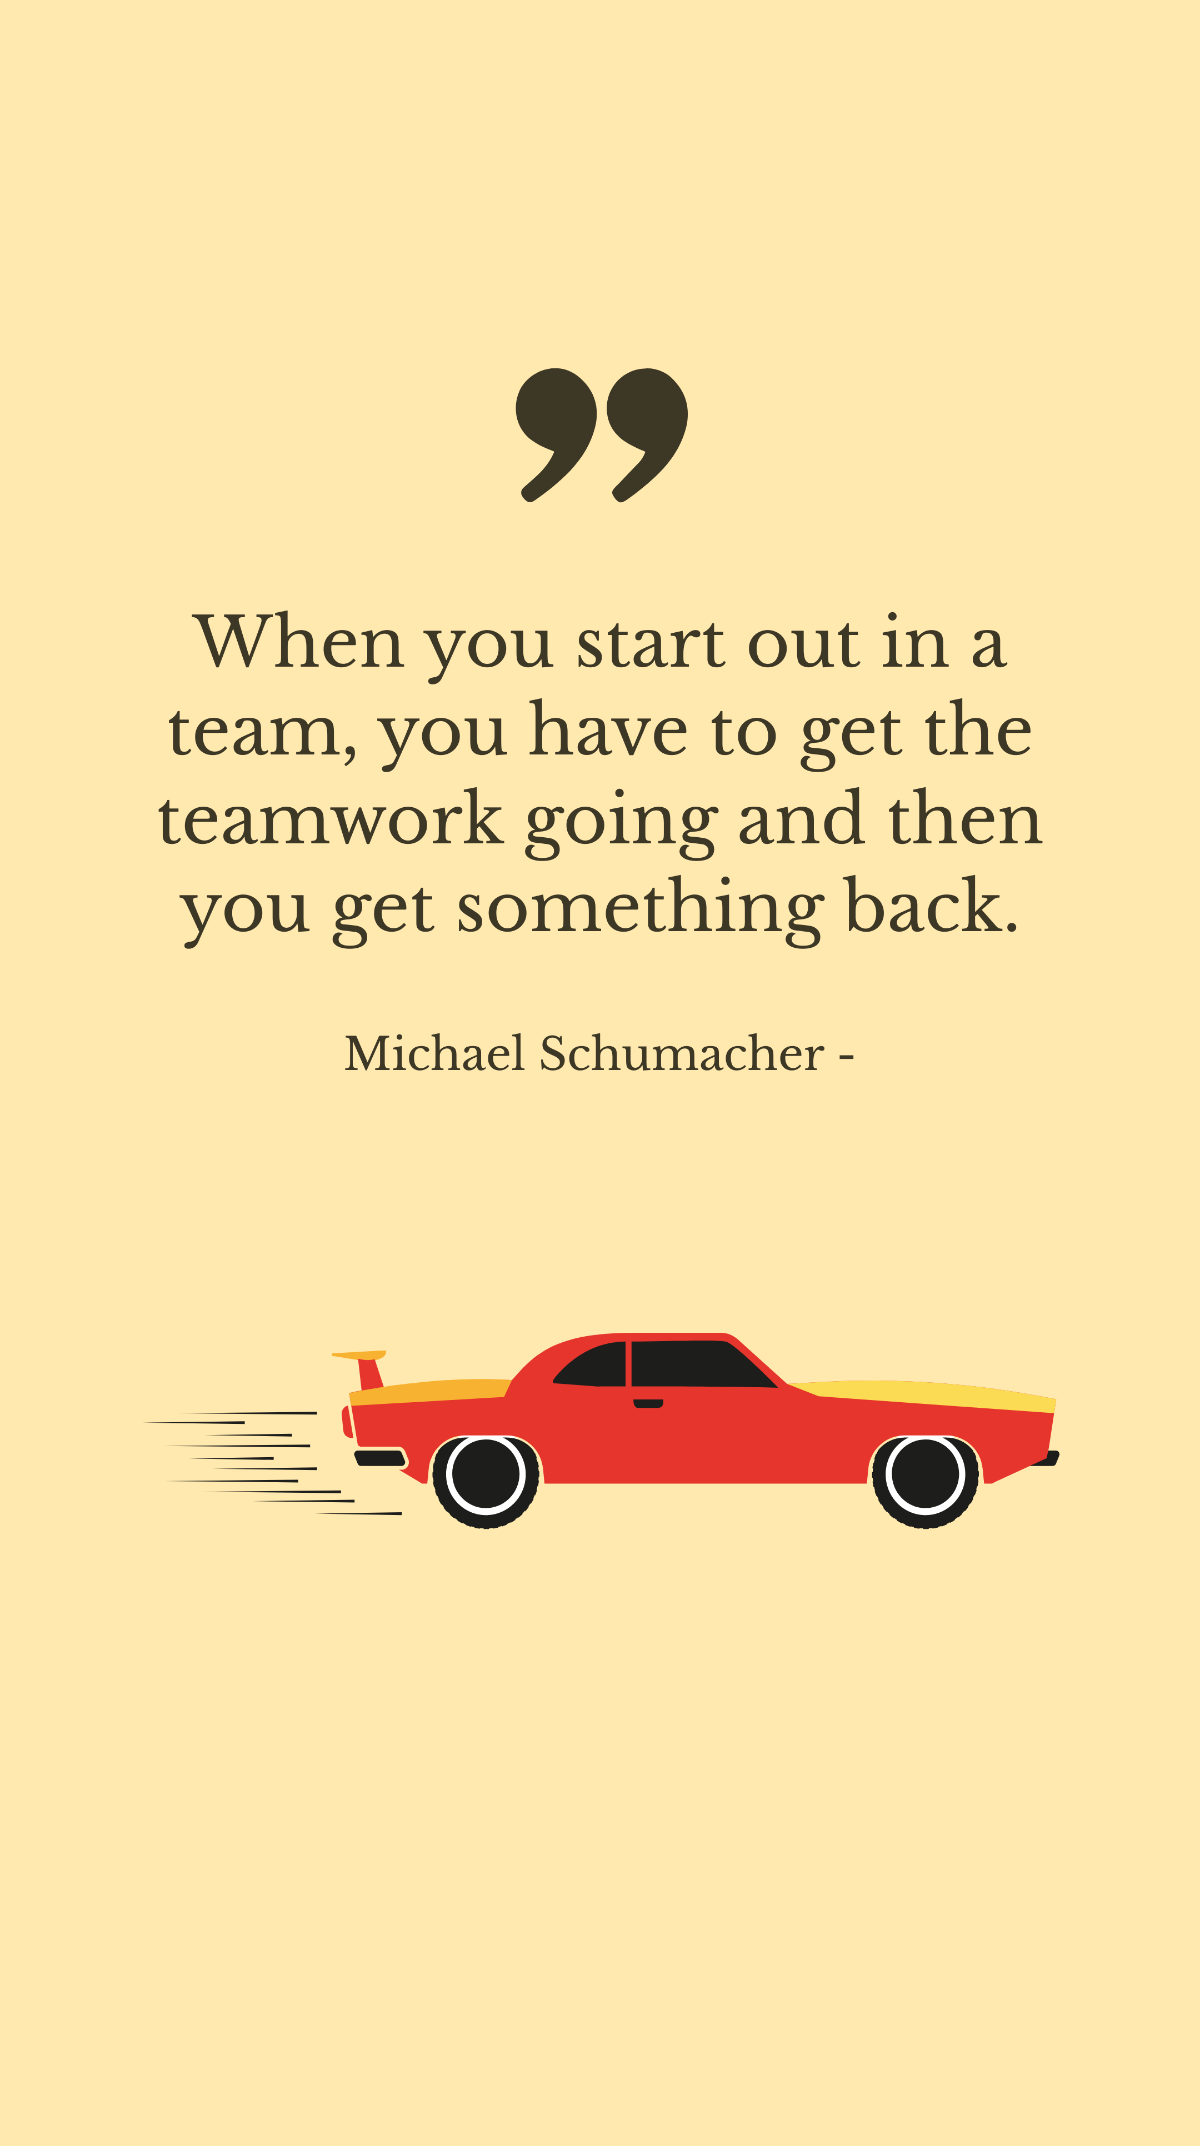 Michael Schumacher - When you start out in a team, you have to get the teamwork going and then you get something back. Template